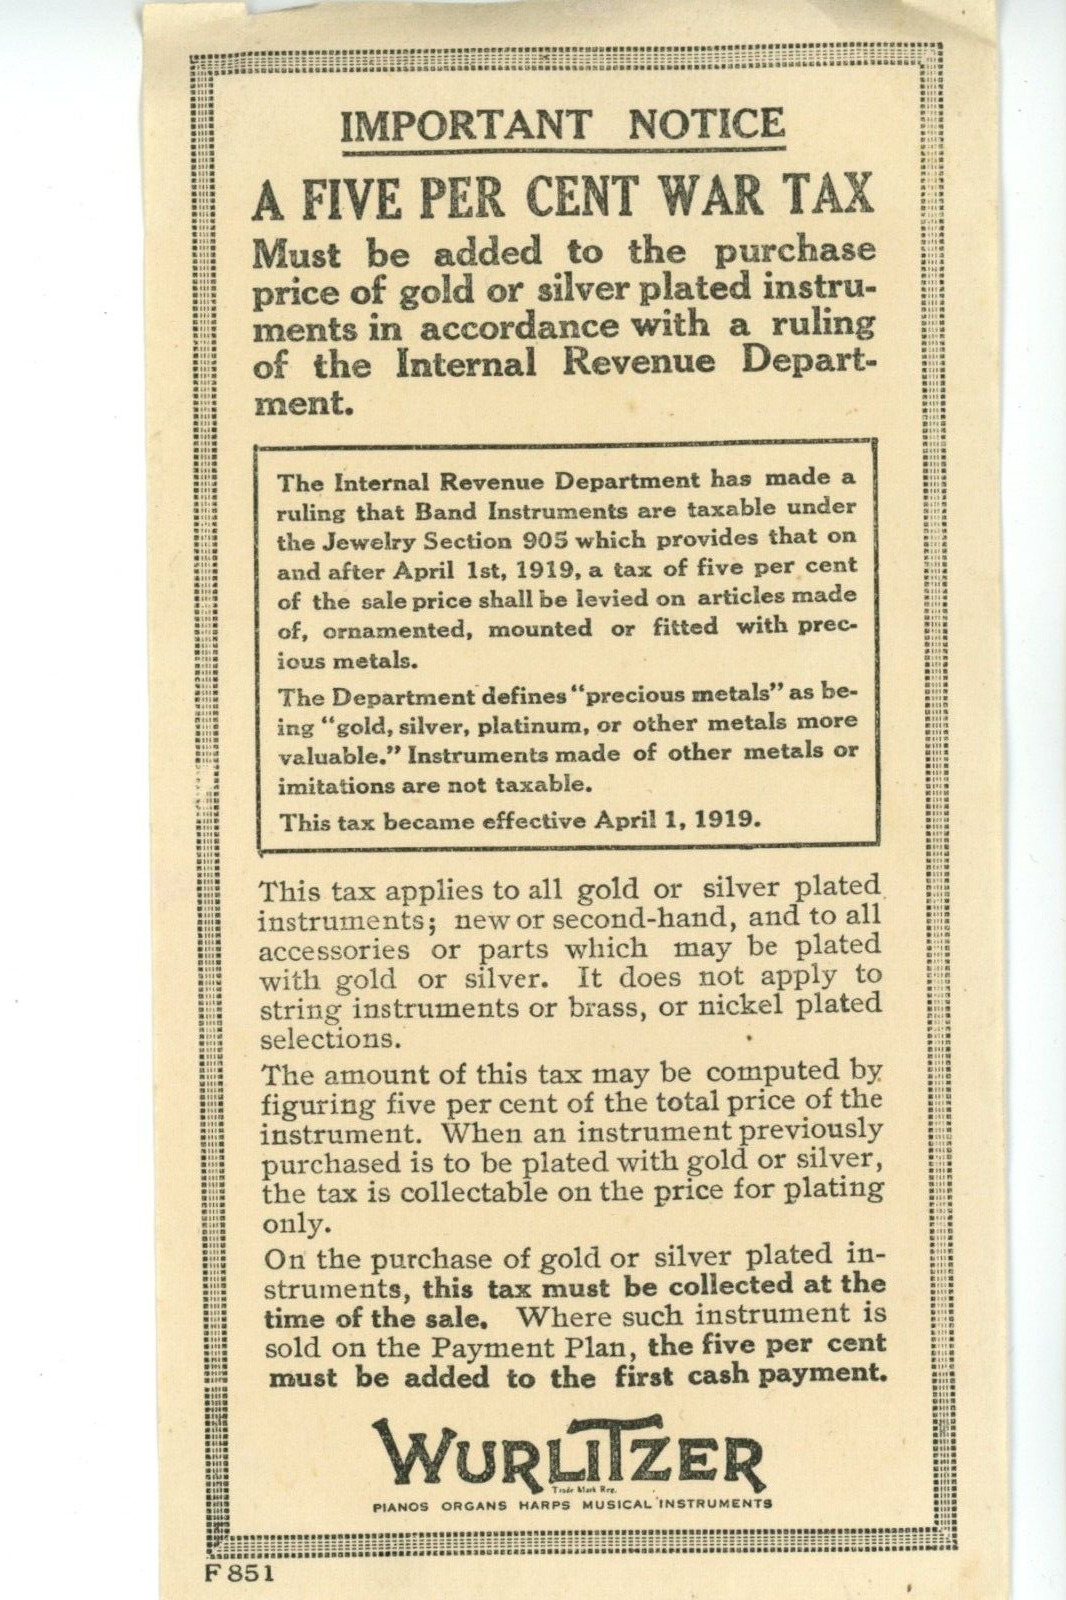 WW 1  Wurlitzer  Notice for 5% War Tax  On Gold Or Silver Plated Instruments